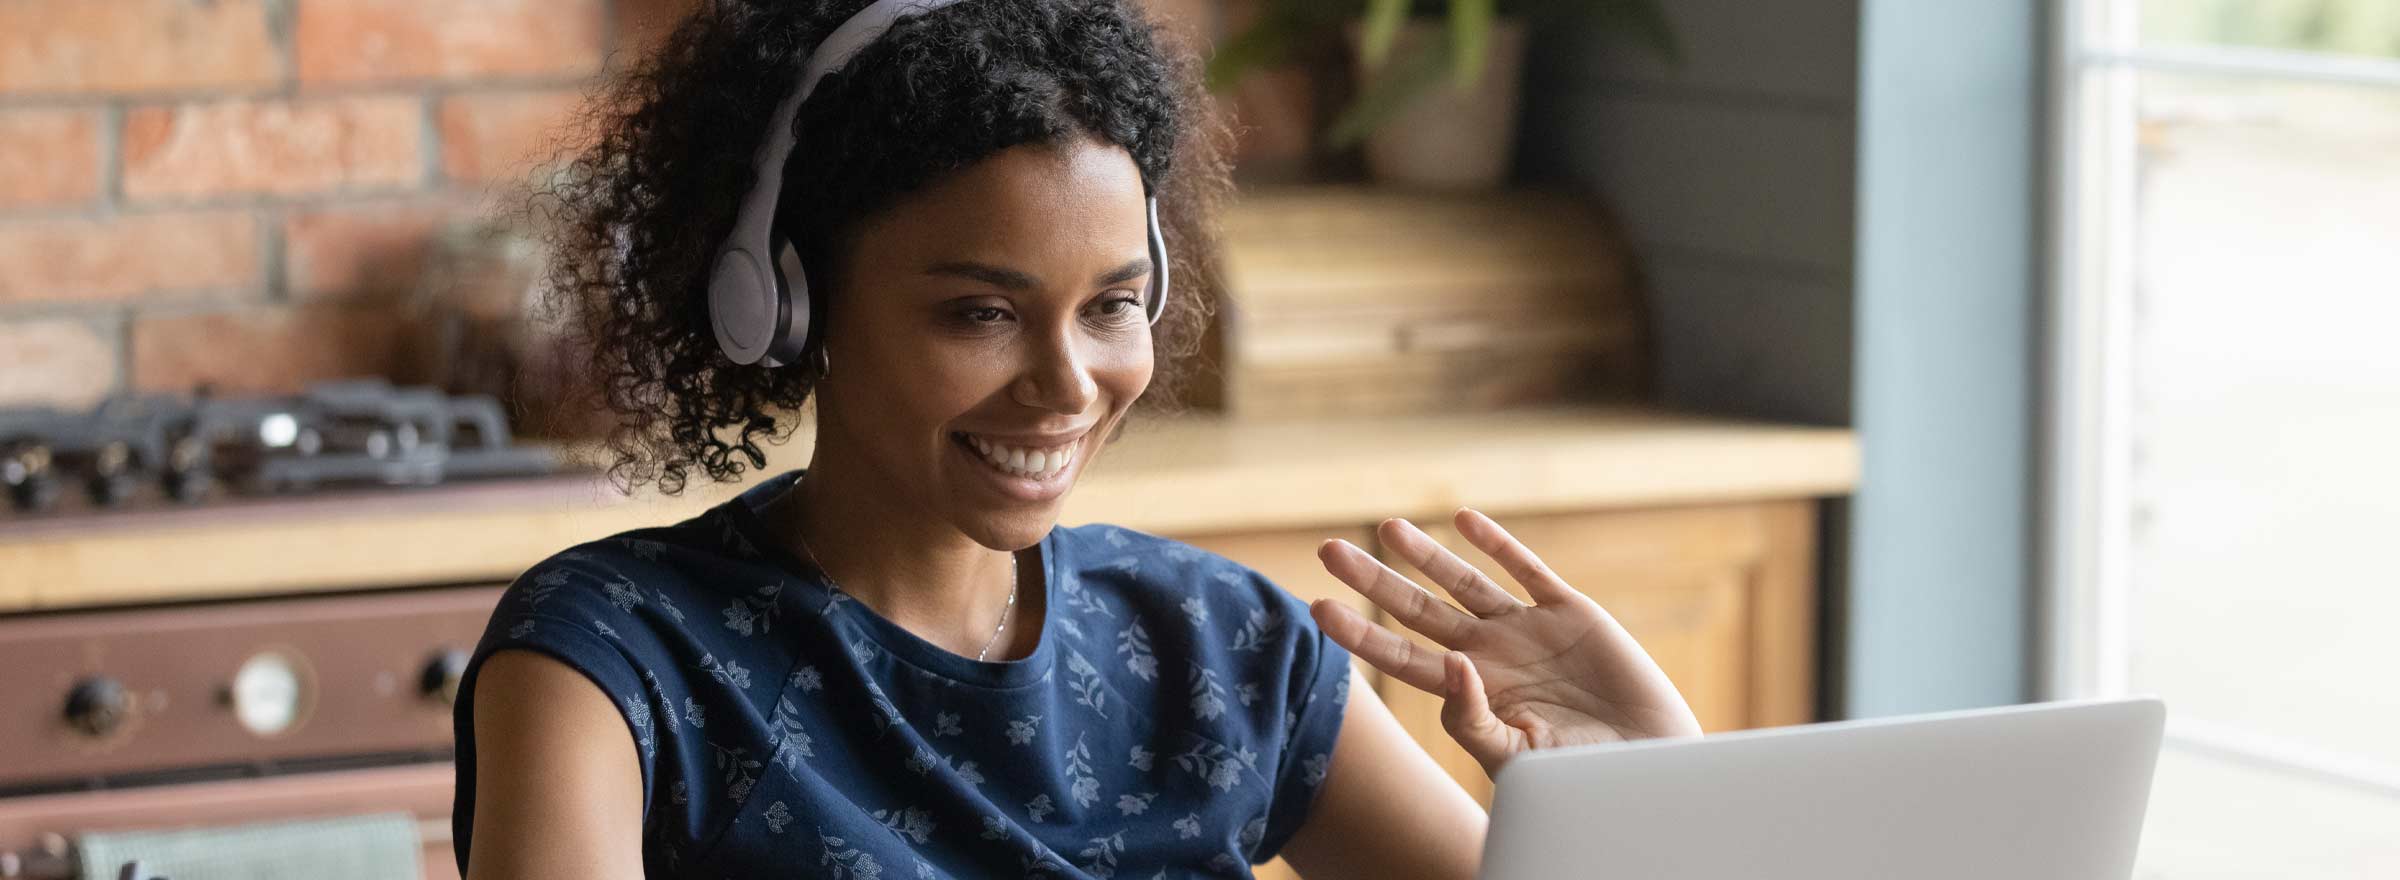 woman in headset waving at a computer screen